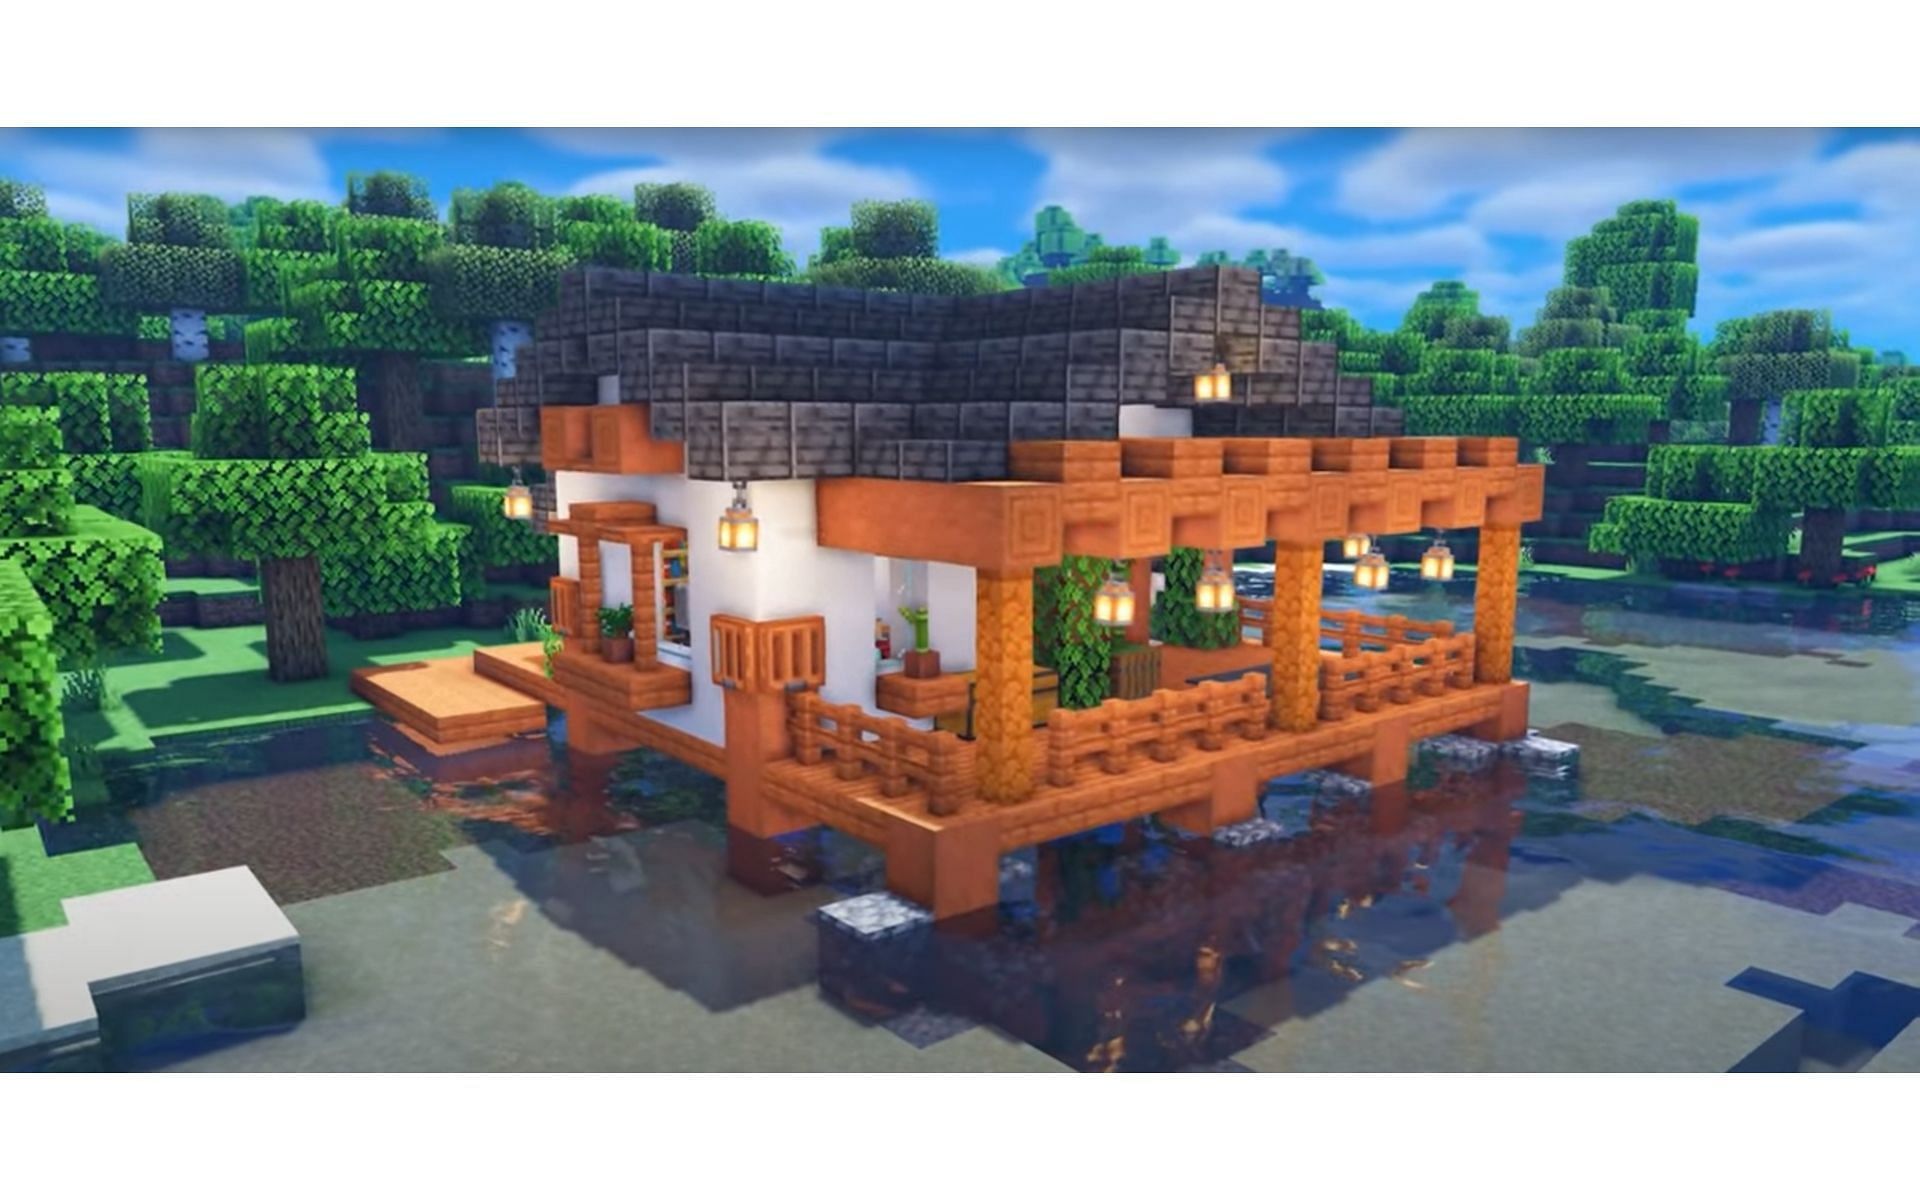 This build uses traditional Japanese architecture (Image via YouTube/Julious)